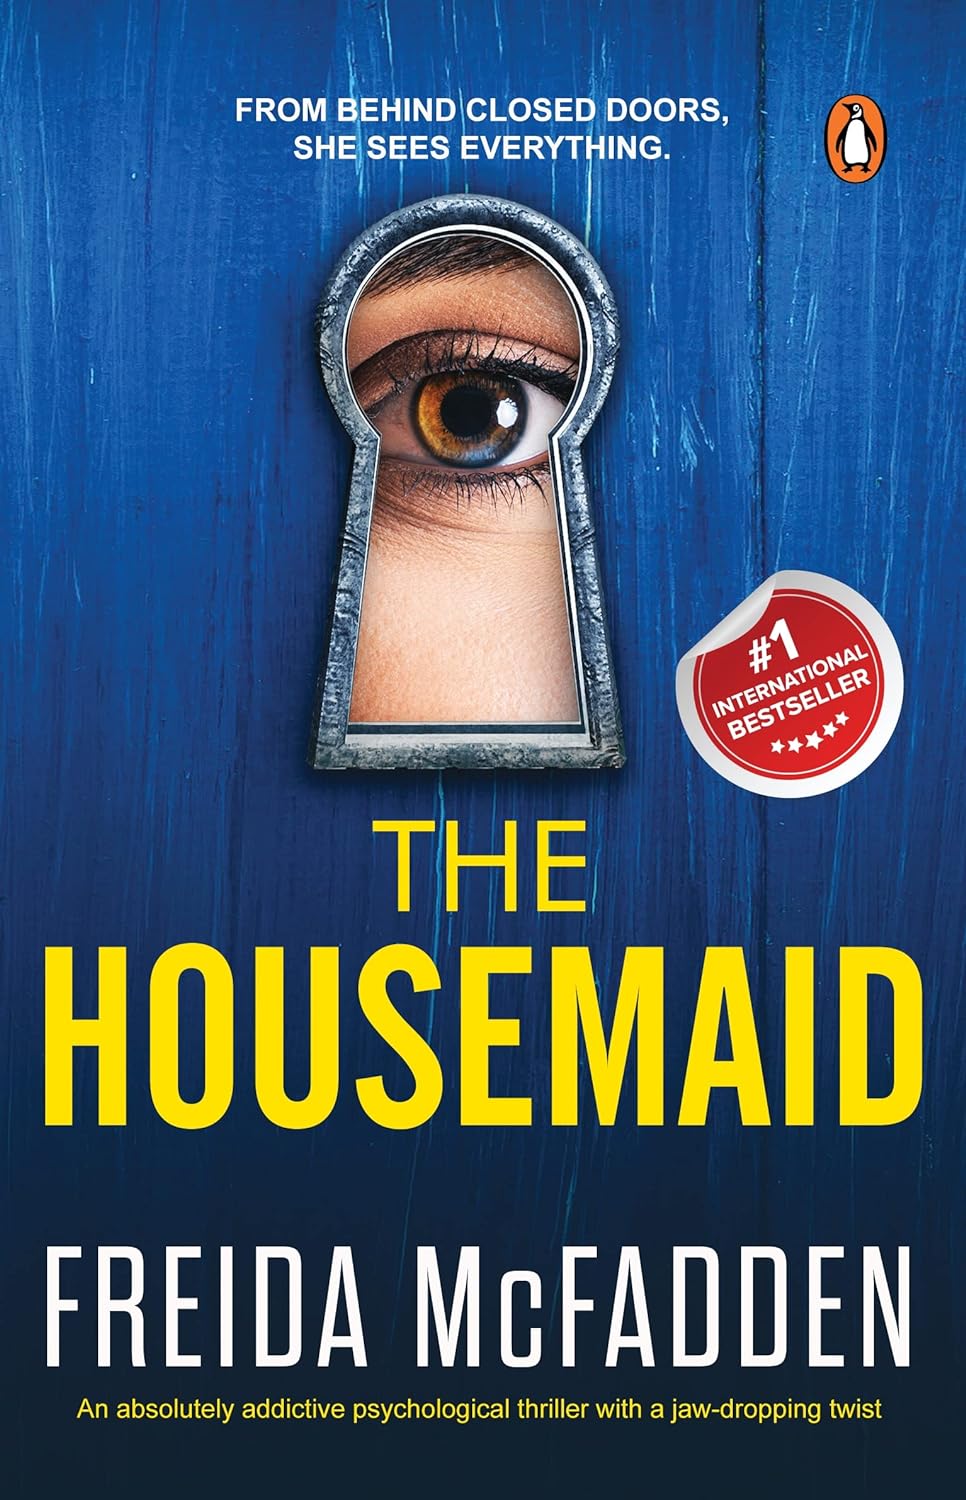 The Housemaid: An Absolutely Addictive Psychological Thriller with a Jaw-Dropping Twist by Freida McFadden